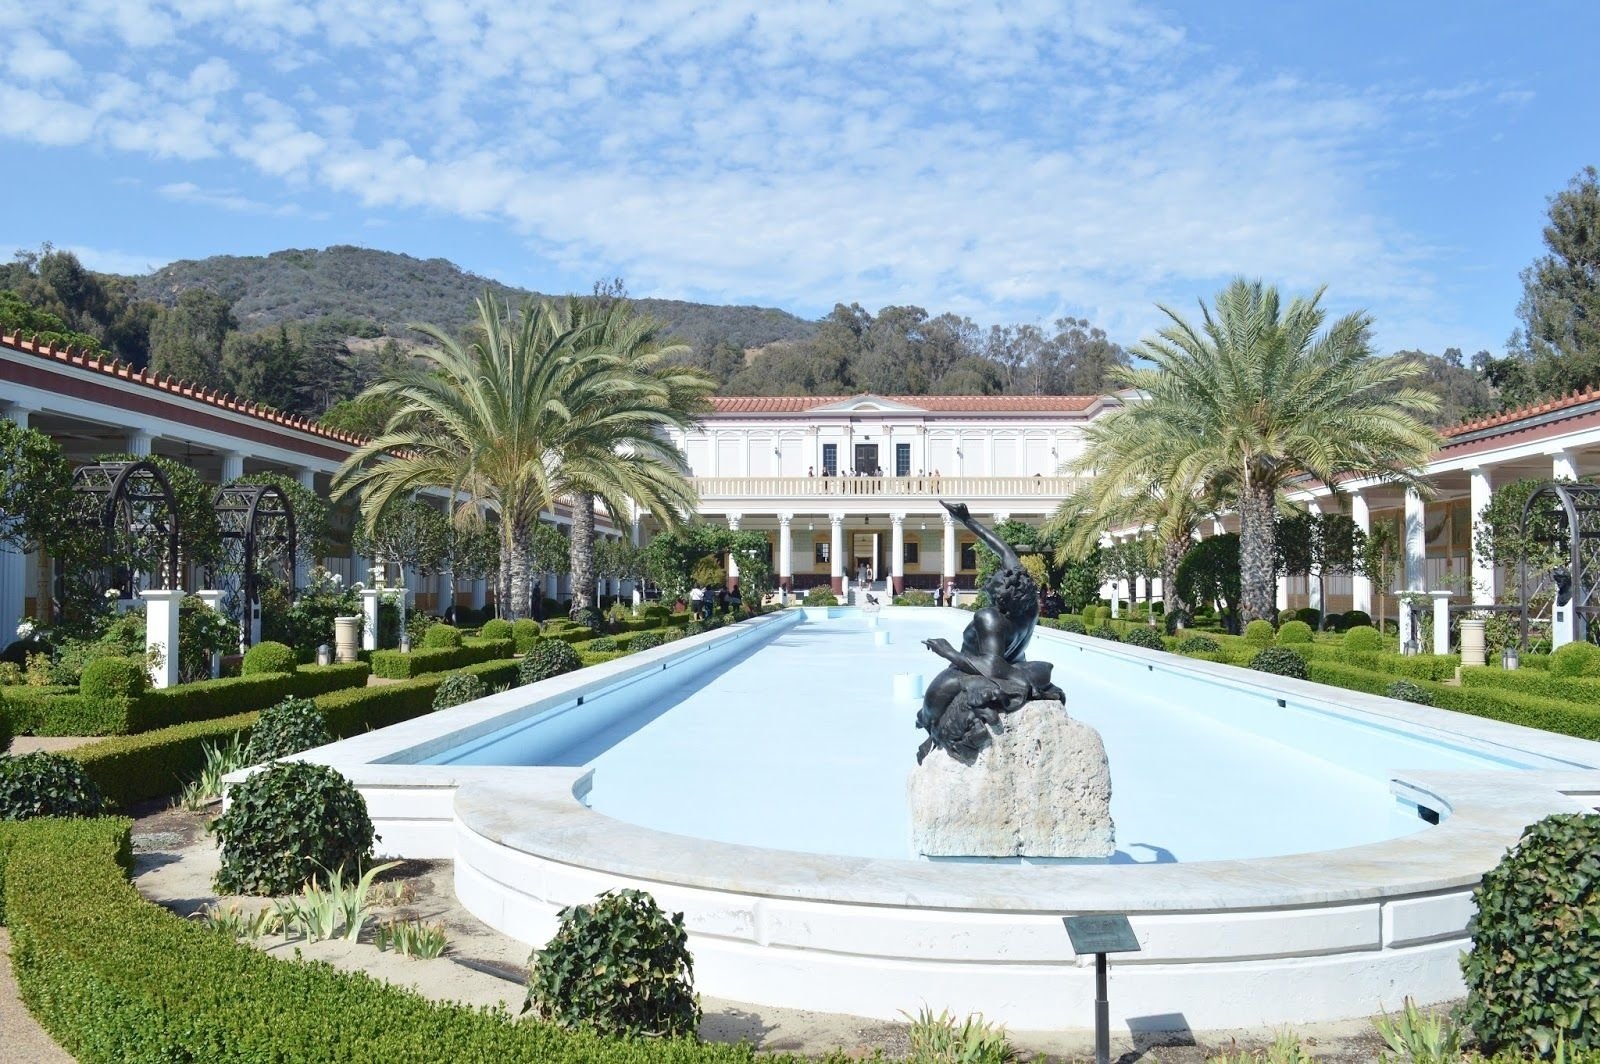 10 Spectacular Date Ideas Orange County Ca the getty villa date ideas in oc x la lunches and dates 2022